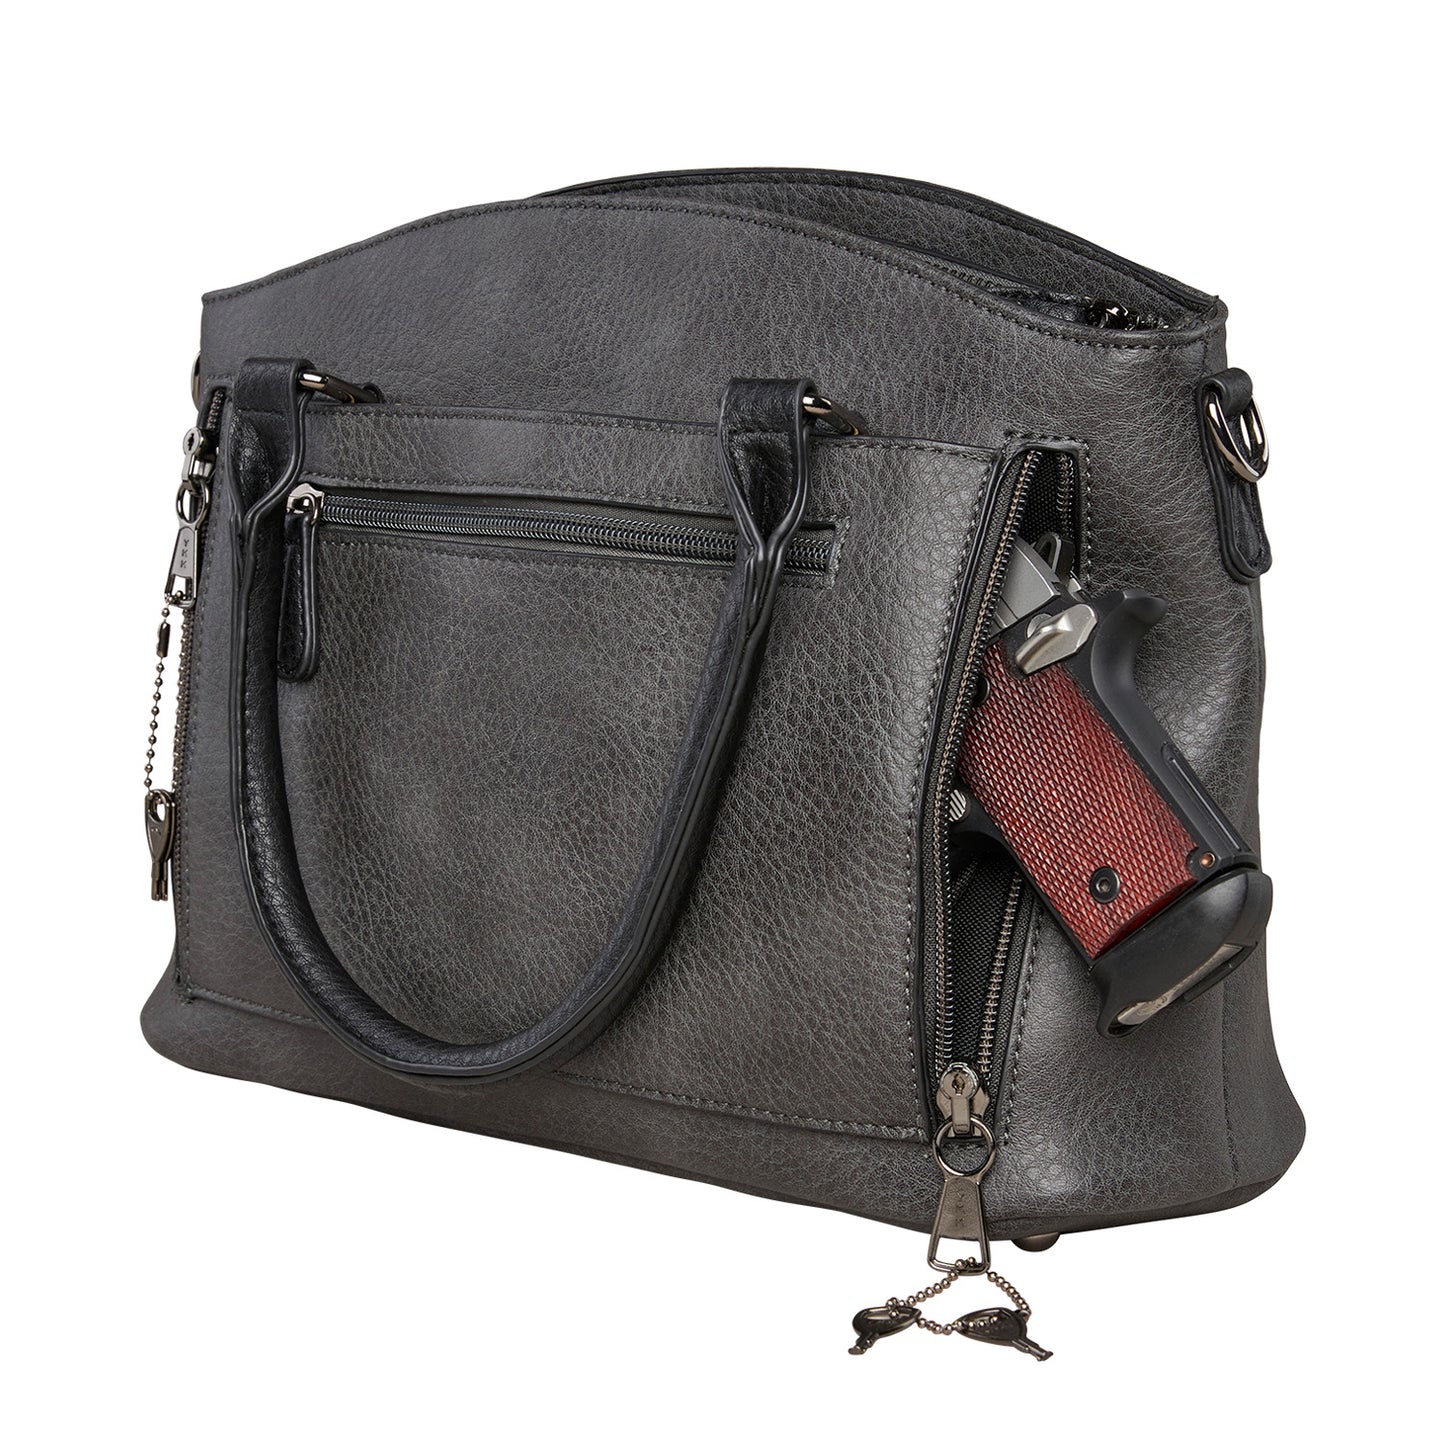 CONCEALED CARRY CARLY SATCHEL